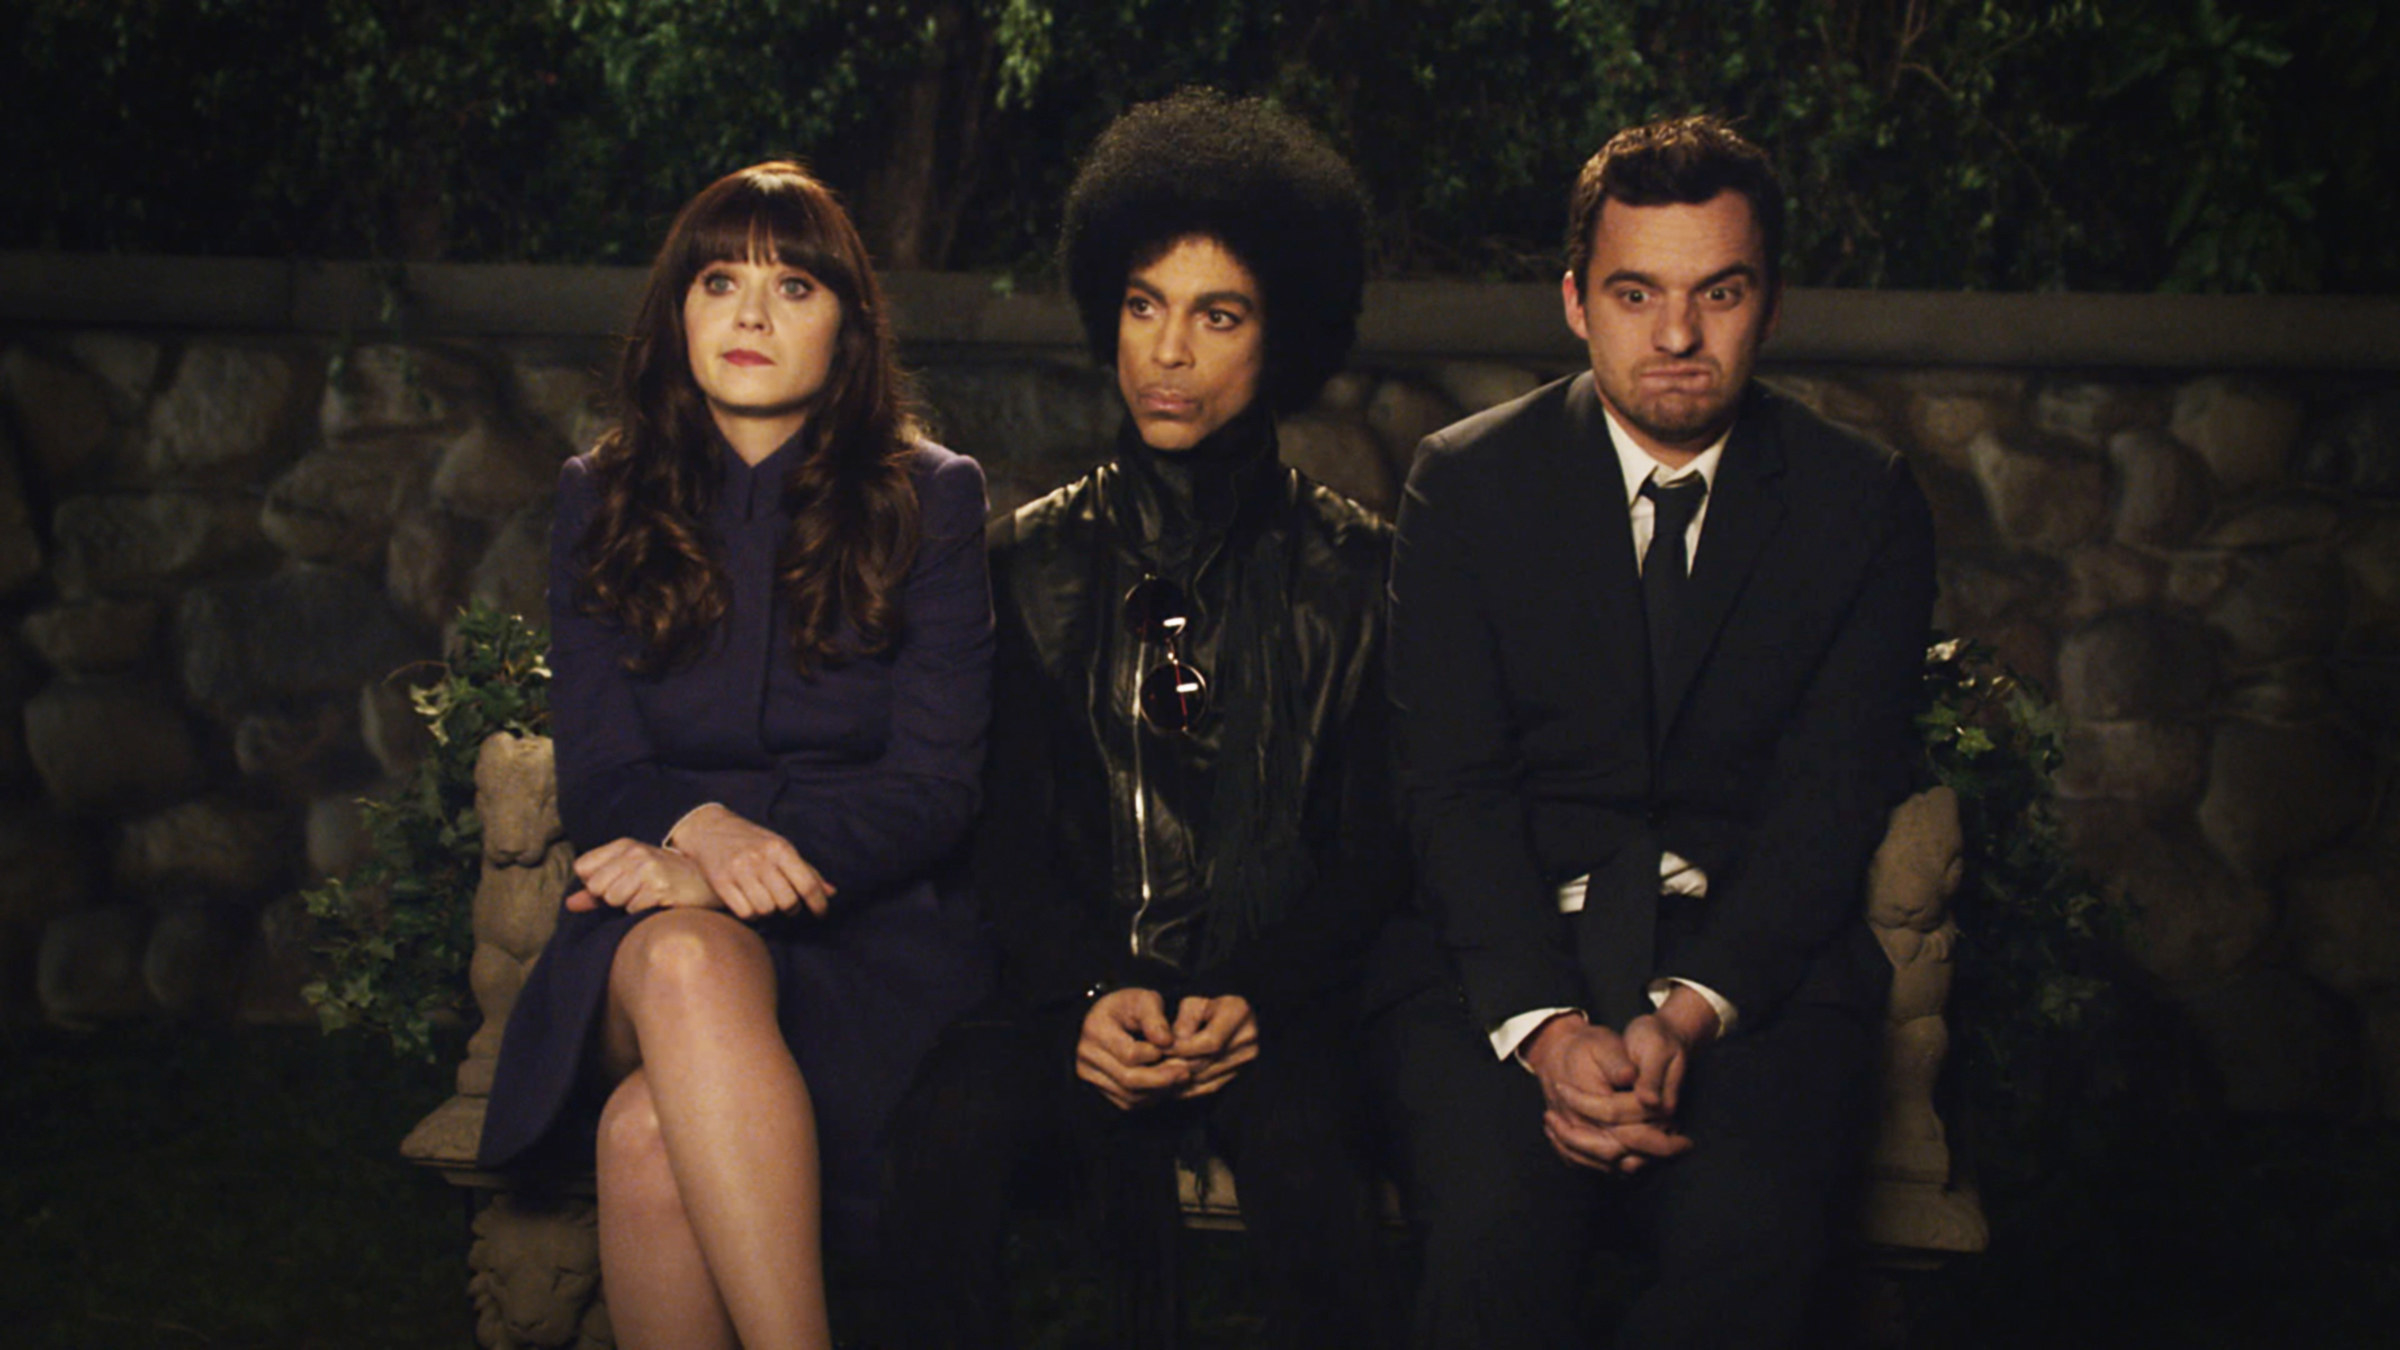 Zooey Deschanel, Prince, and Jake Johnson sitting together on a bench, looking forward with serious expressions. Deschanel in a blue dress, Prince in a black outfit with a shiny blouse, Johnson in a suit